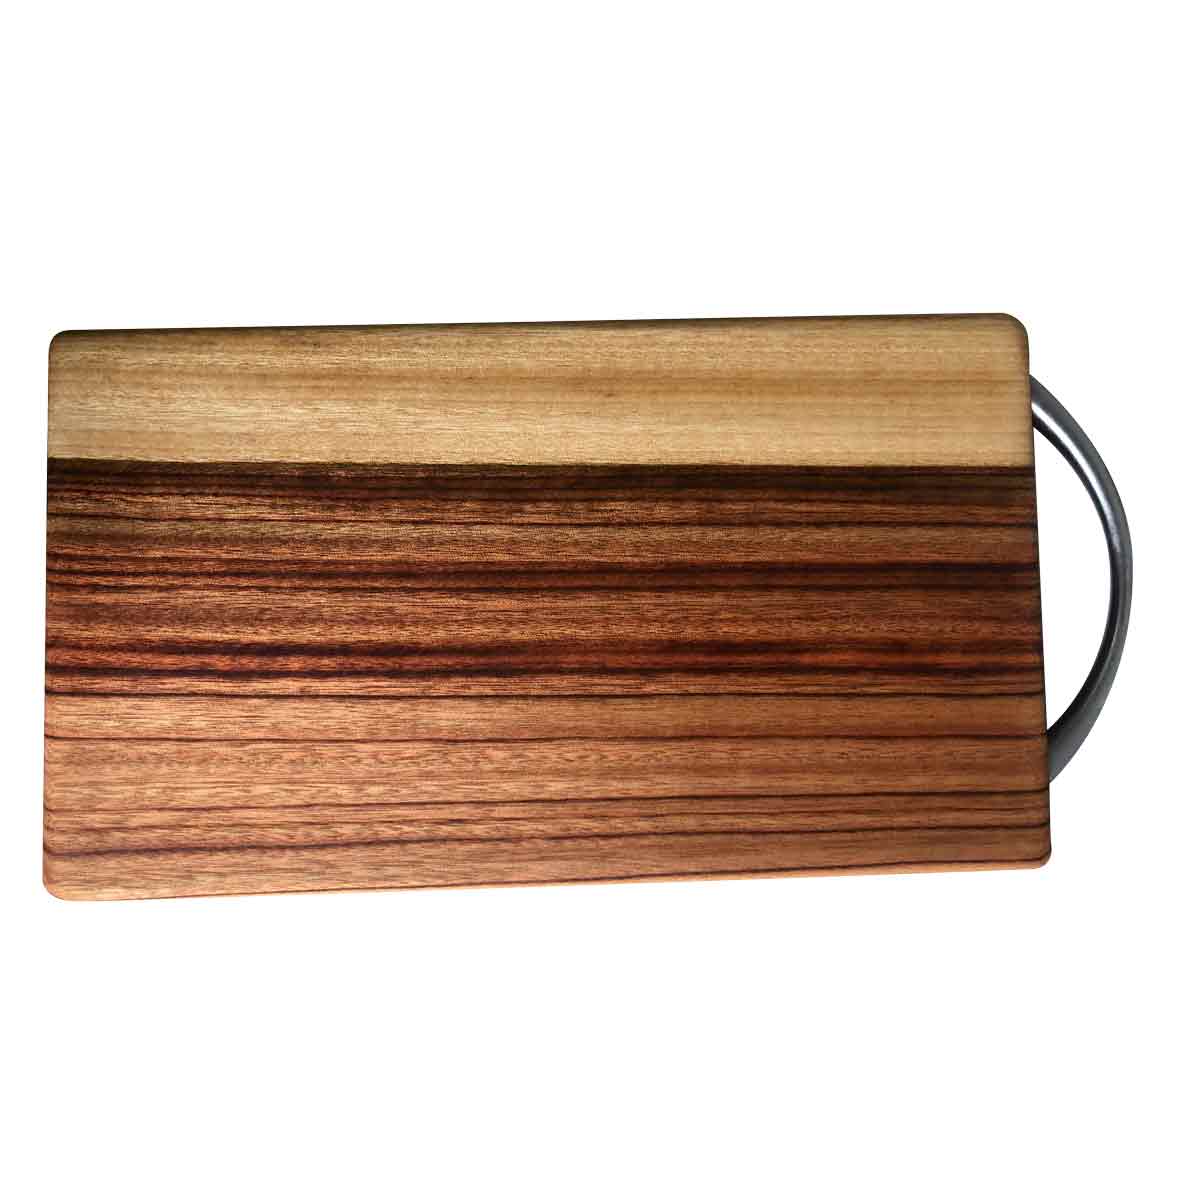 A small wood cutting or charcuterie board made of camphor laurel, with a stainless steel  handle designed by Nature's Boards.